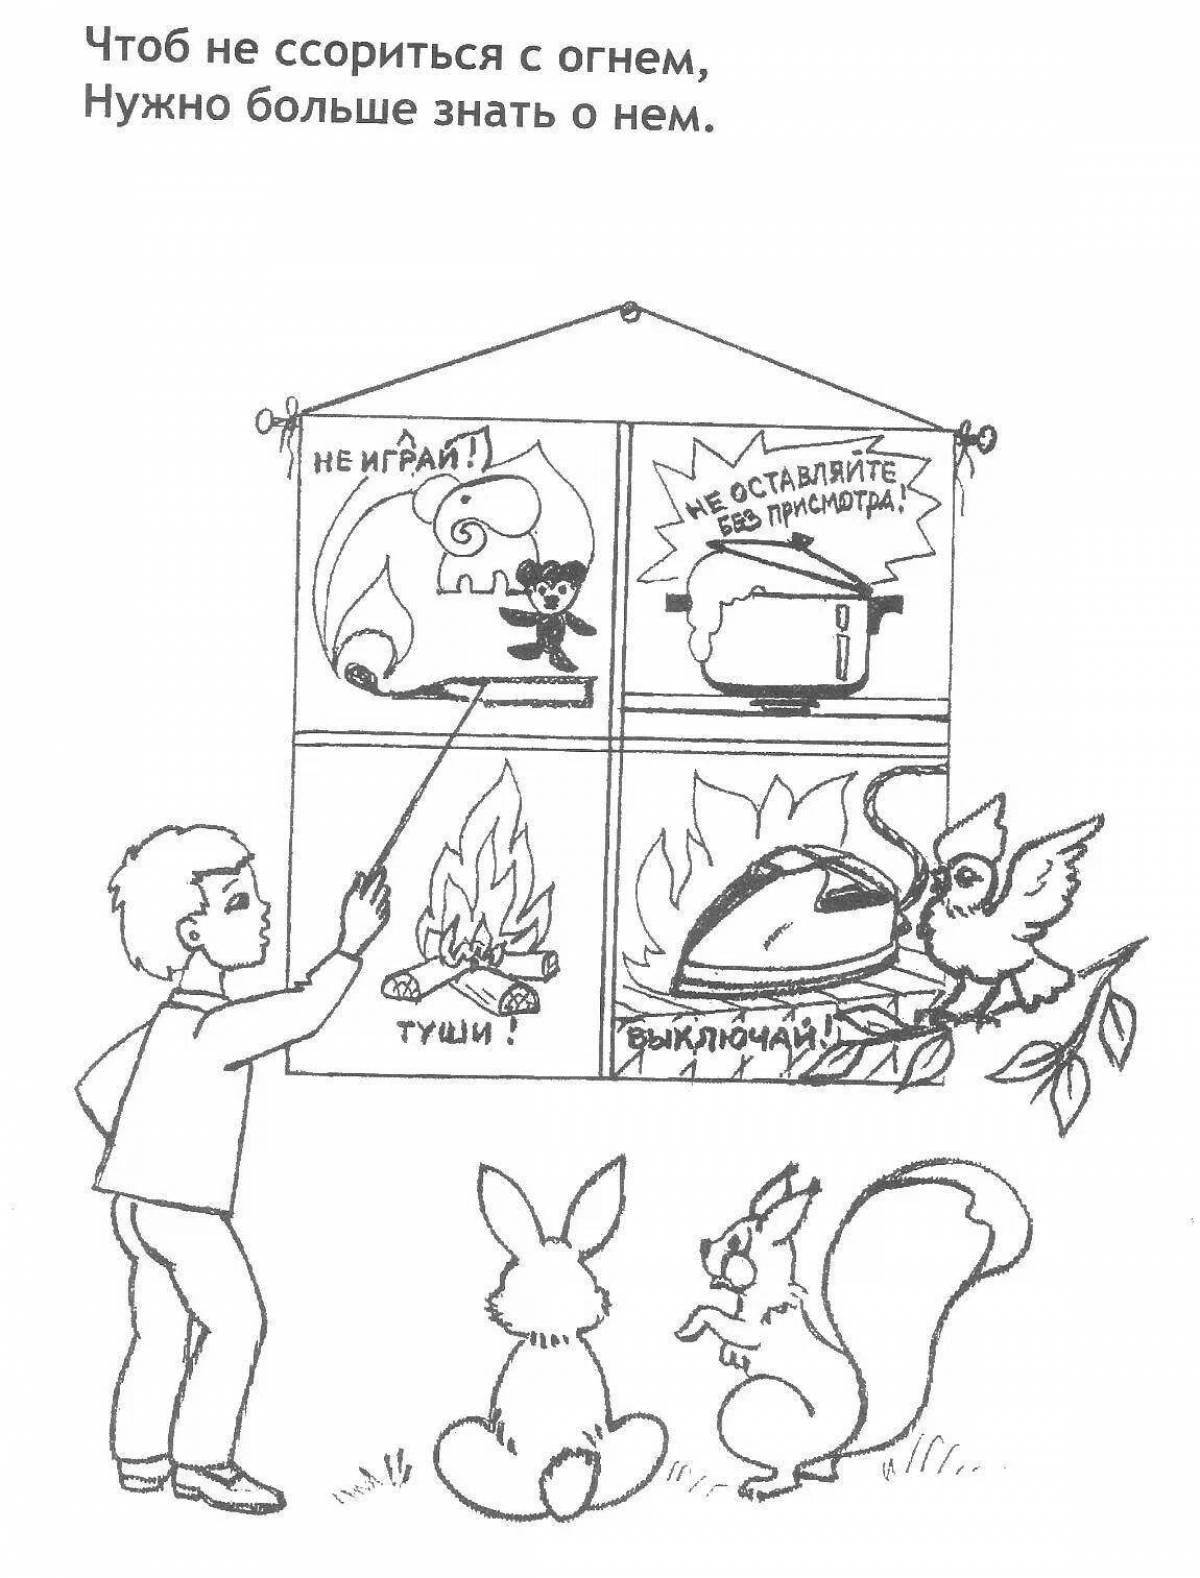 Colorful fire safety coloring page for 6-7 year olds